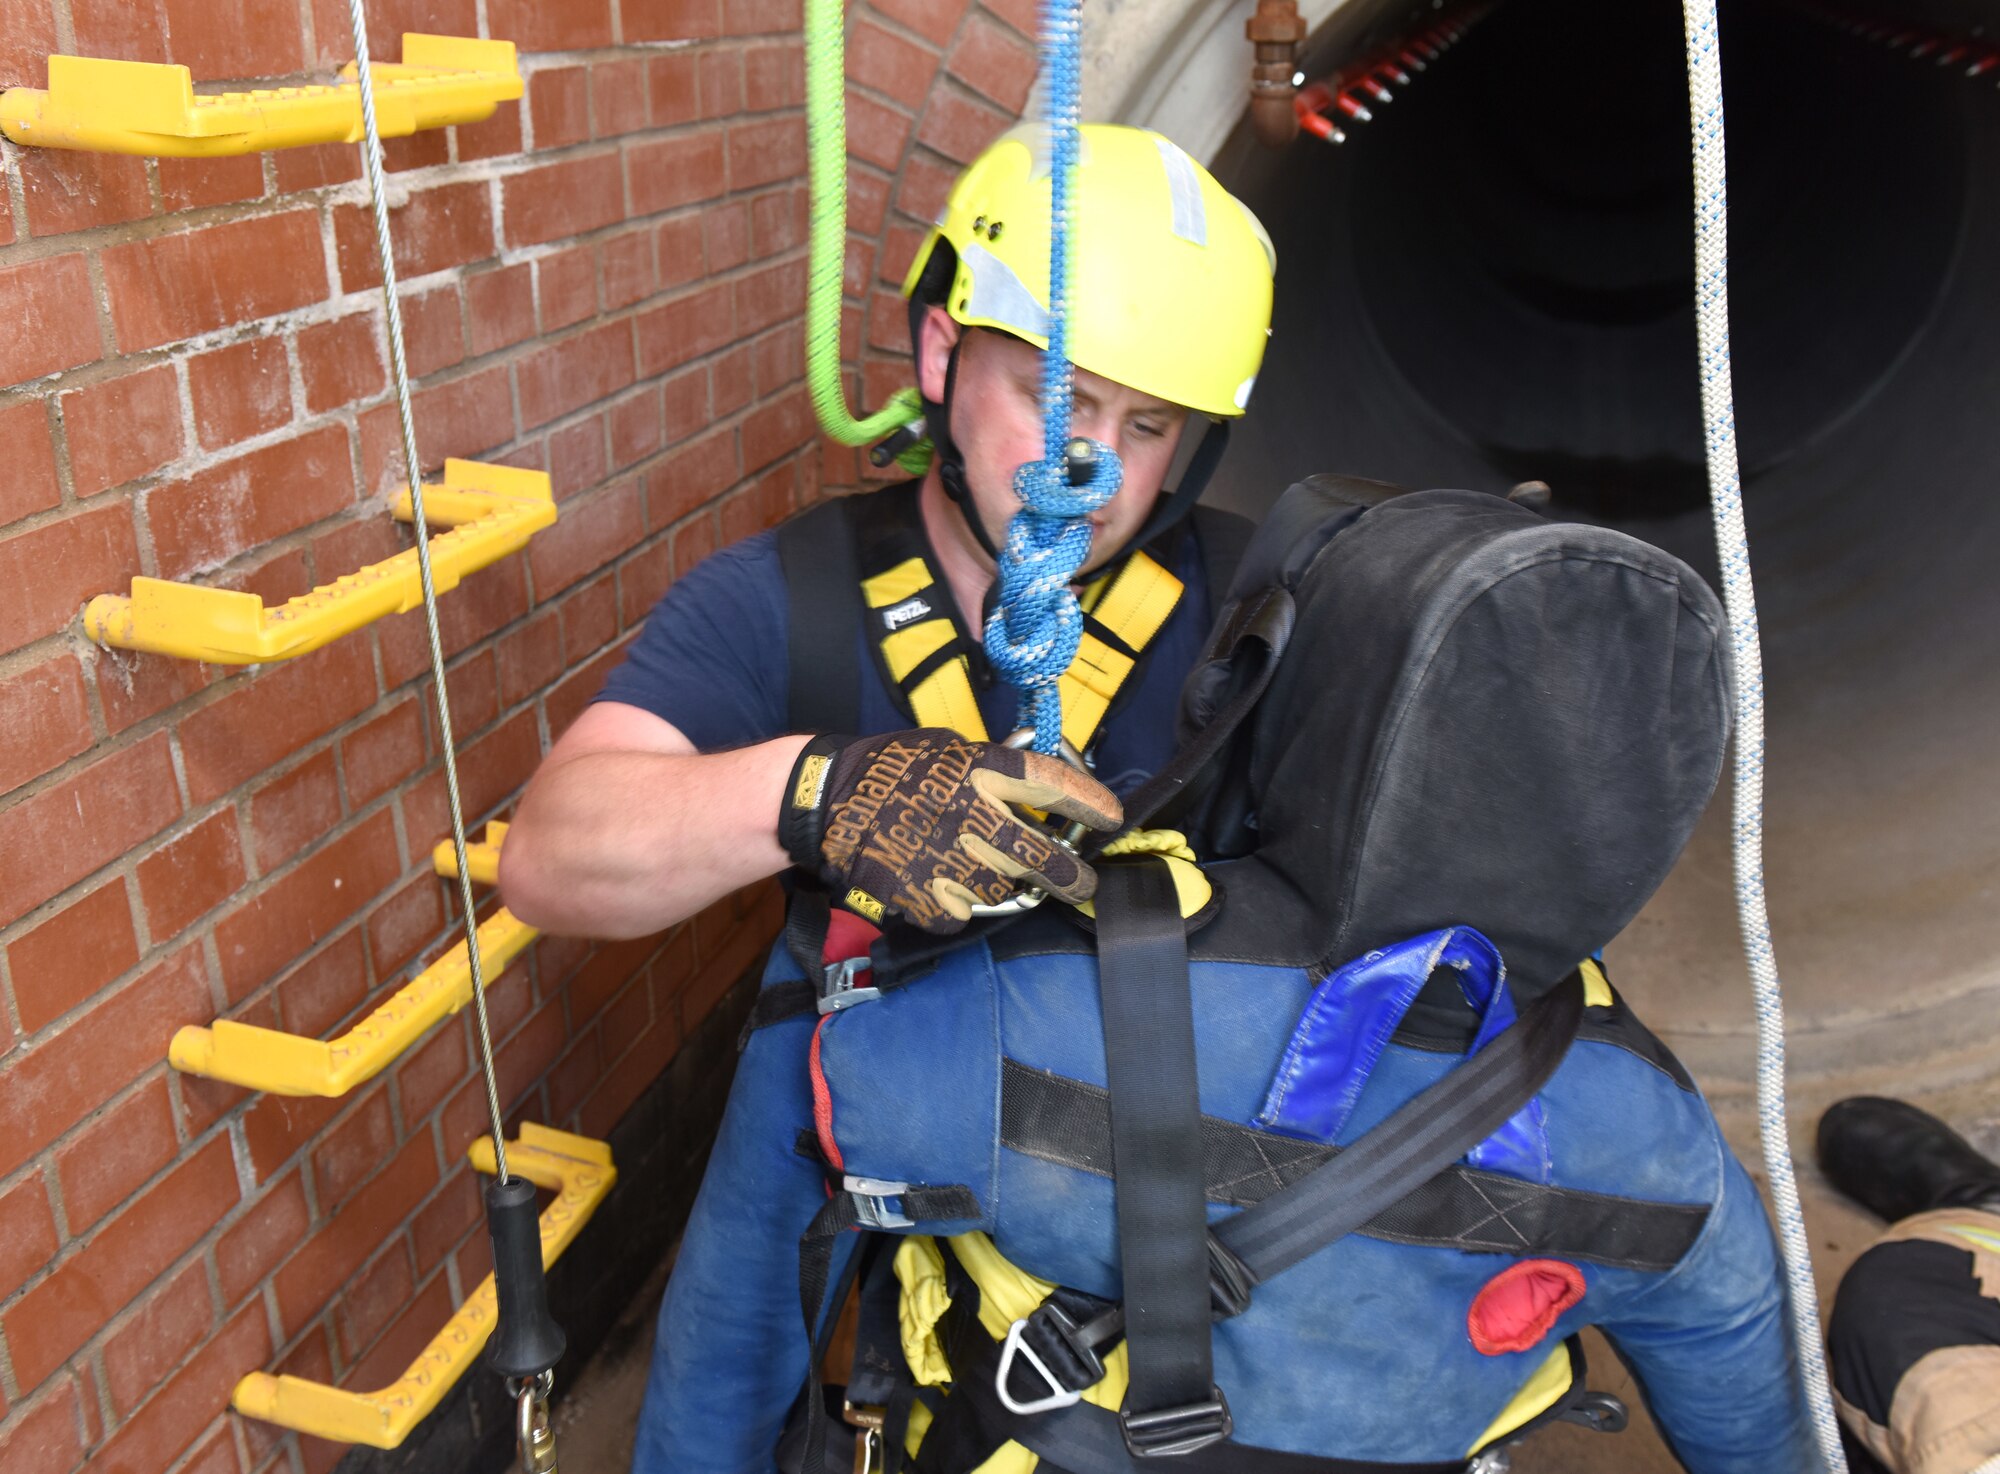 Firefighter Eddie Brant, 100th Civil Engineer Squadron Fire Department, fits an extraction harness onto a simulated victim during confined space training at Royal Air Force Mildenhall, England, April 14, 2022. The exercise scenario involved a teenager (simulated by the mannequin) who fell and was injured after climbing down into an underground facility. Another firefighter simulated also falling after slipping on a broken step while climbing down to rescue the victim, so other firefighters from his team had to complete the rescue. (U.S. Air Force photo by Karen Abeyasekere)